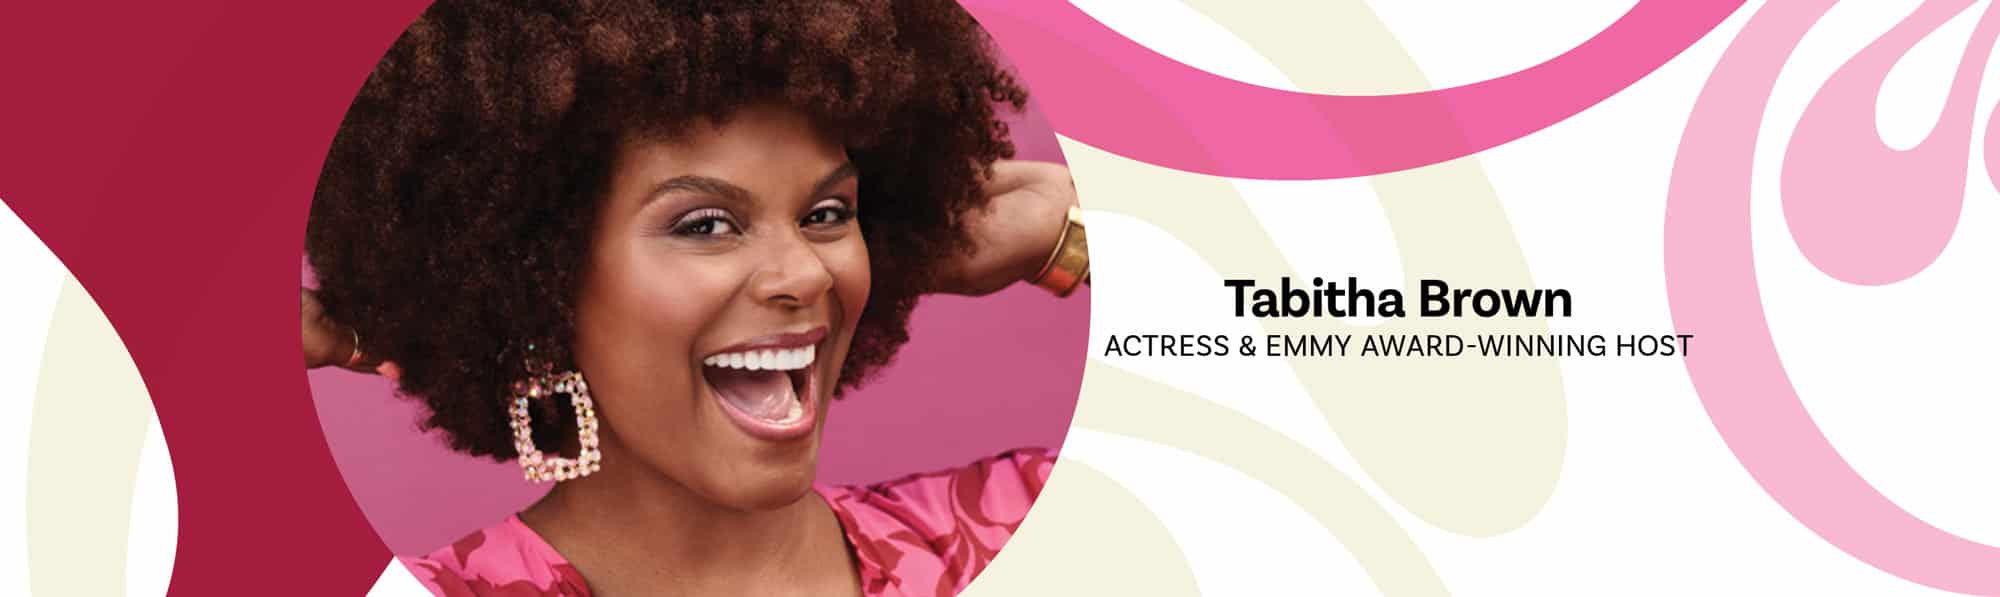 Join Tabitha Brown at the Texas Conference for Women on October 2nd in Austin, TX!